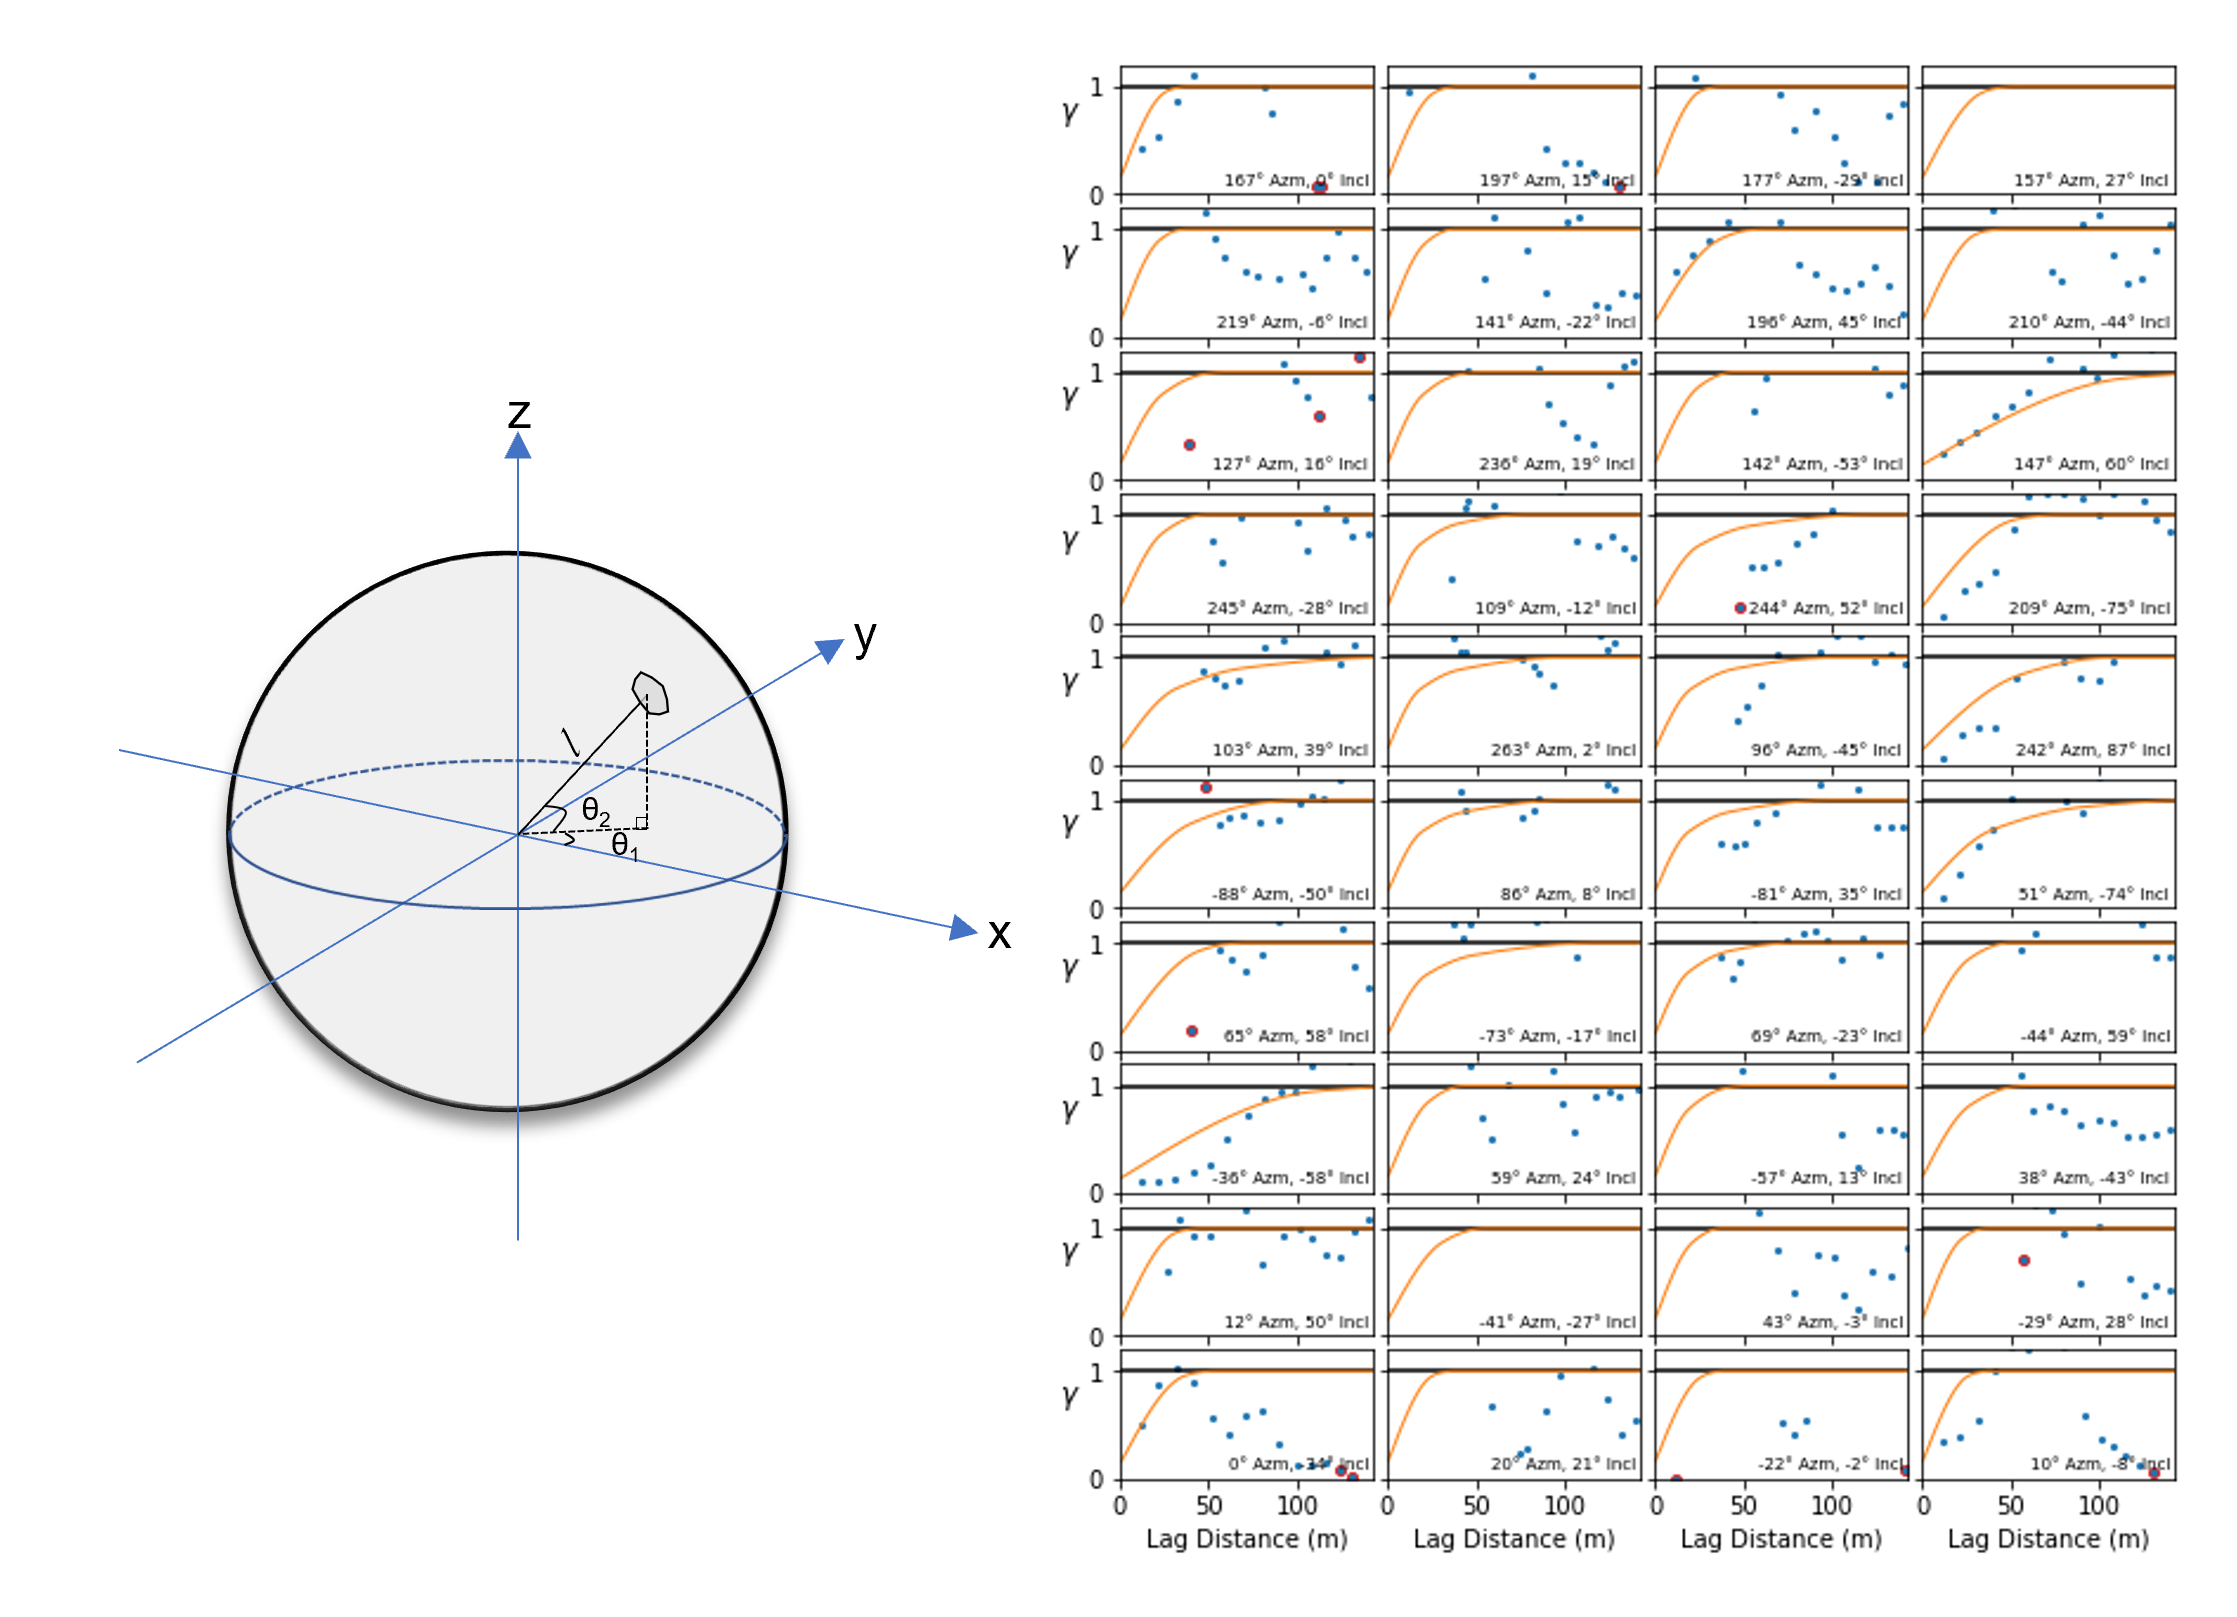 Example of a variogram sphere generated by the Resource Modeling Solutions Platform.